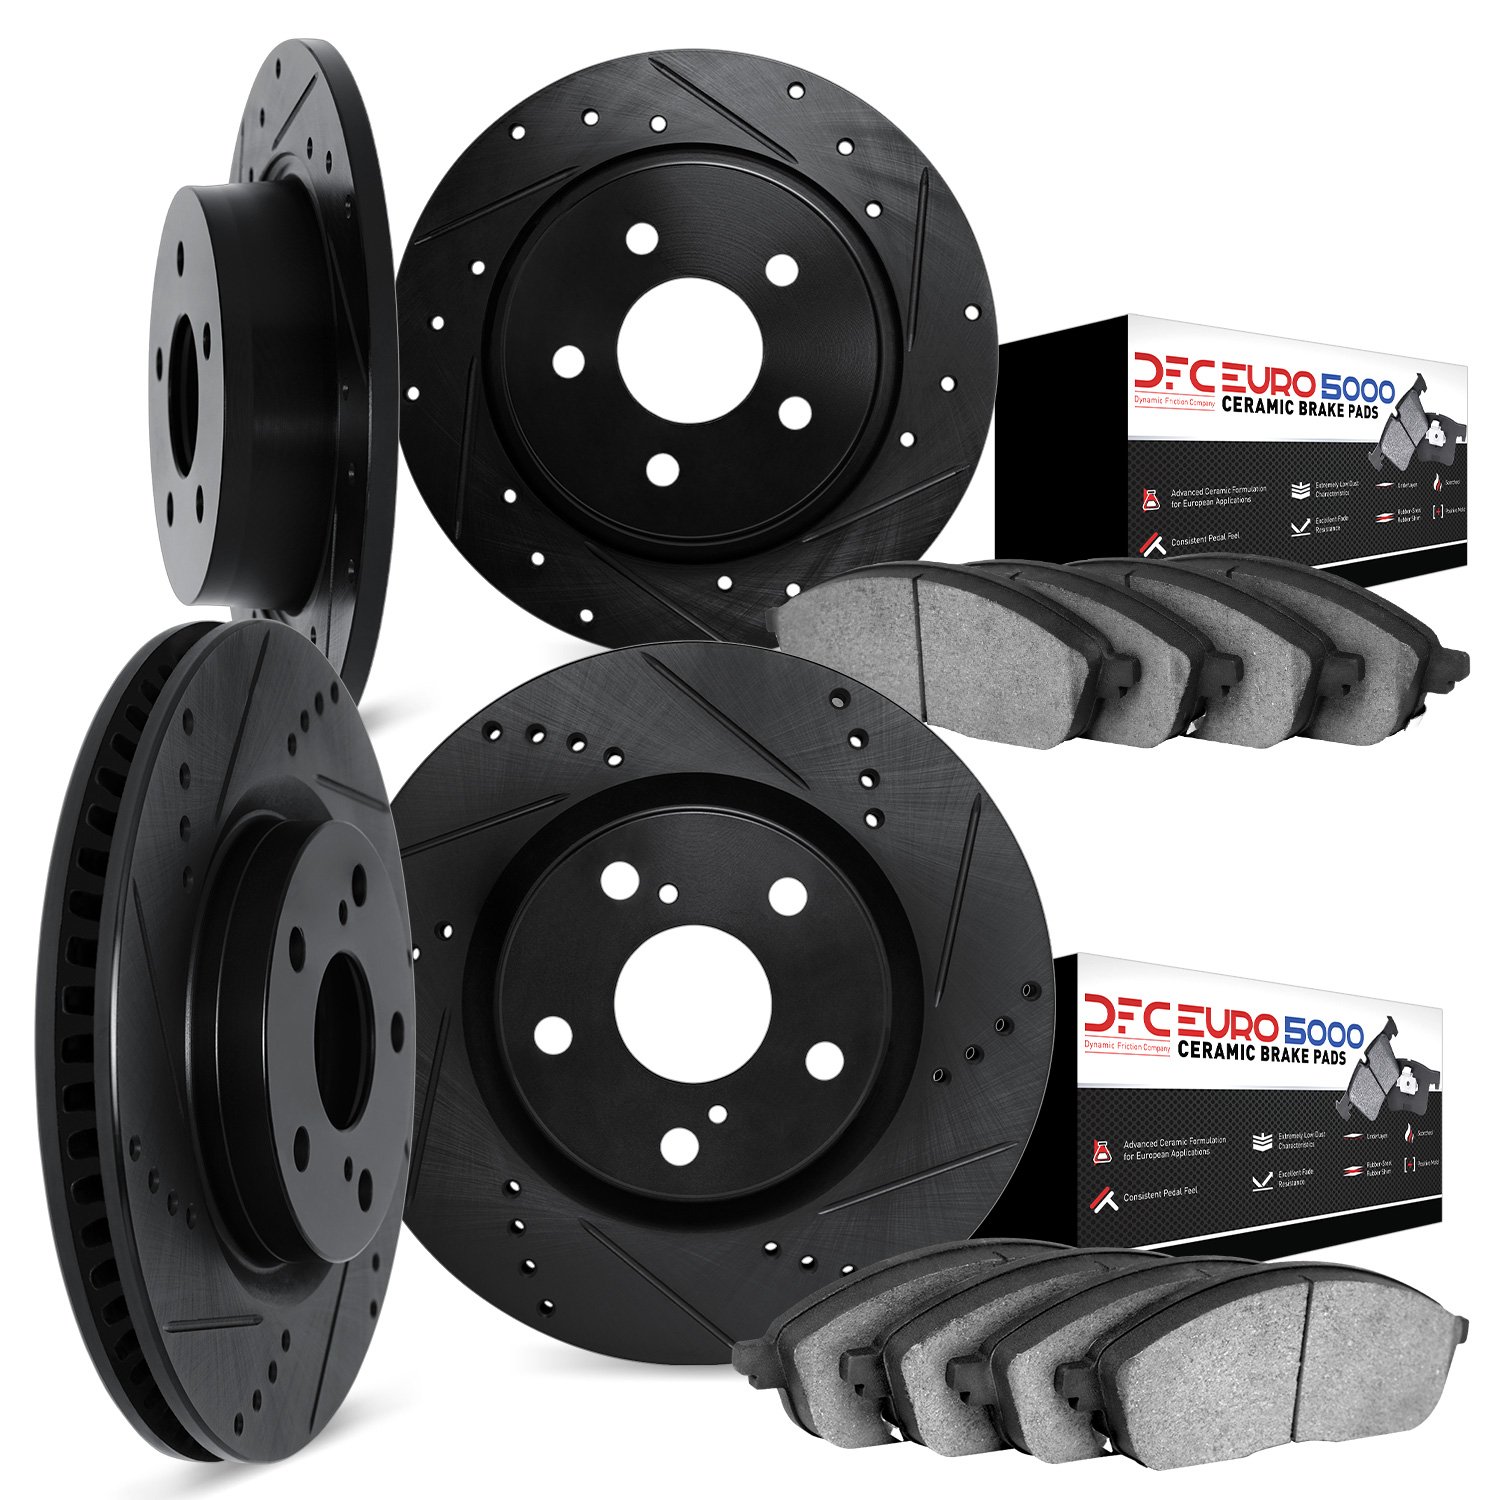 8604-31000 Drilled/Slotted Brake Rotors w/5000 Euro Ceramic Brake Pads Kit [Black], 1981-1982 BMW, Position: Front and Rear